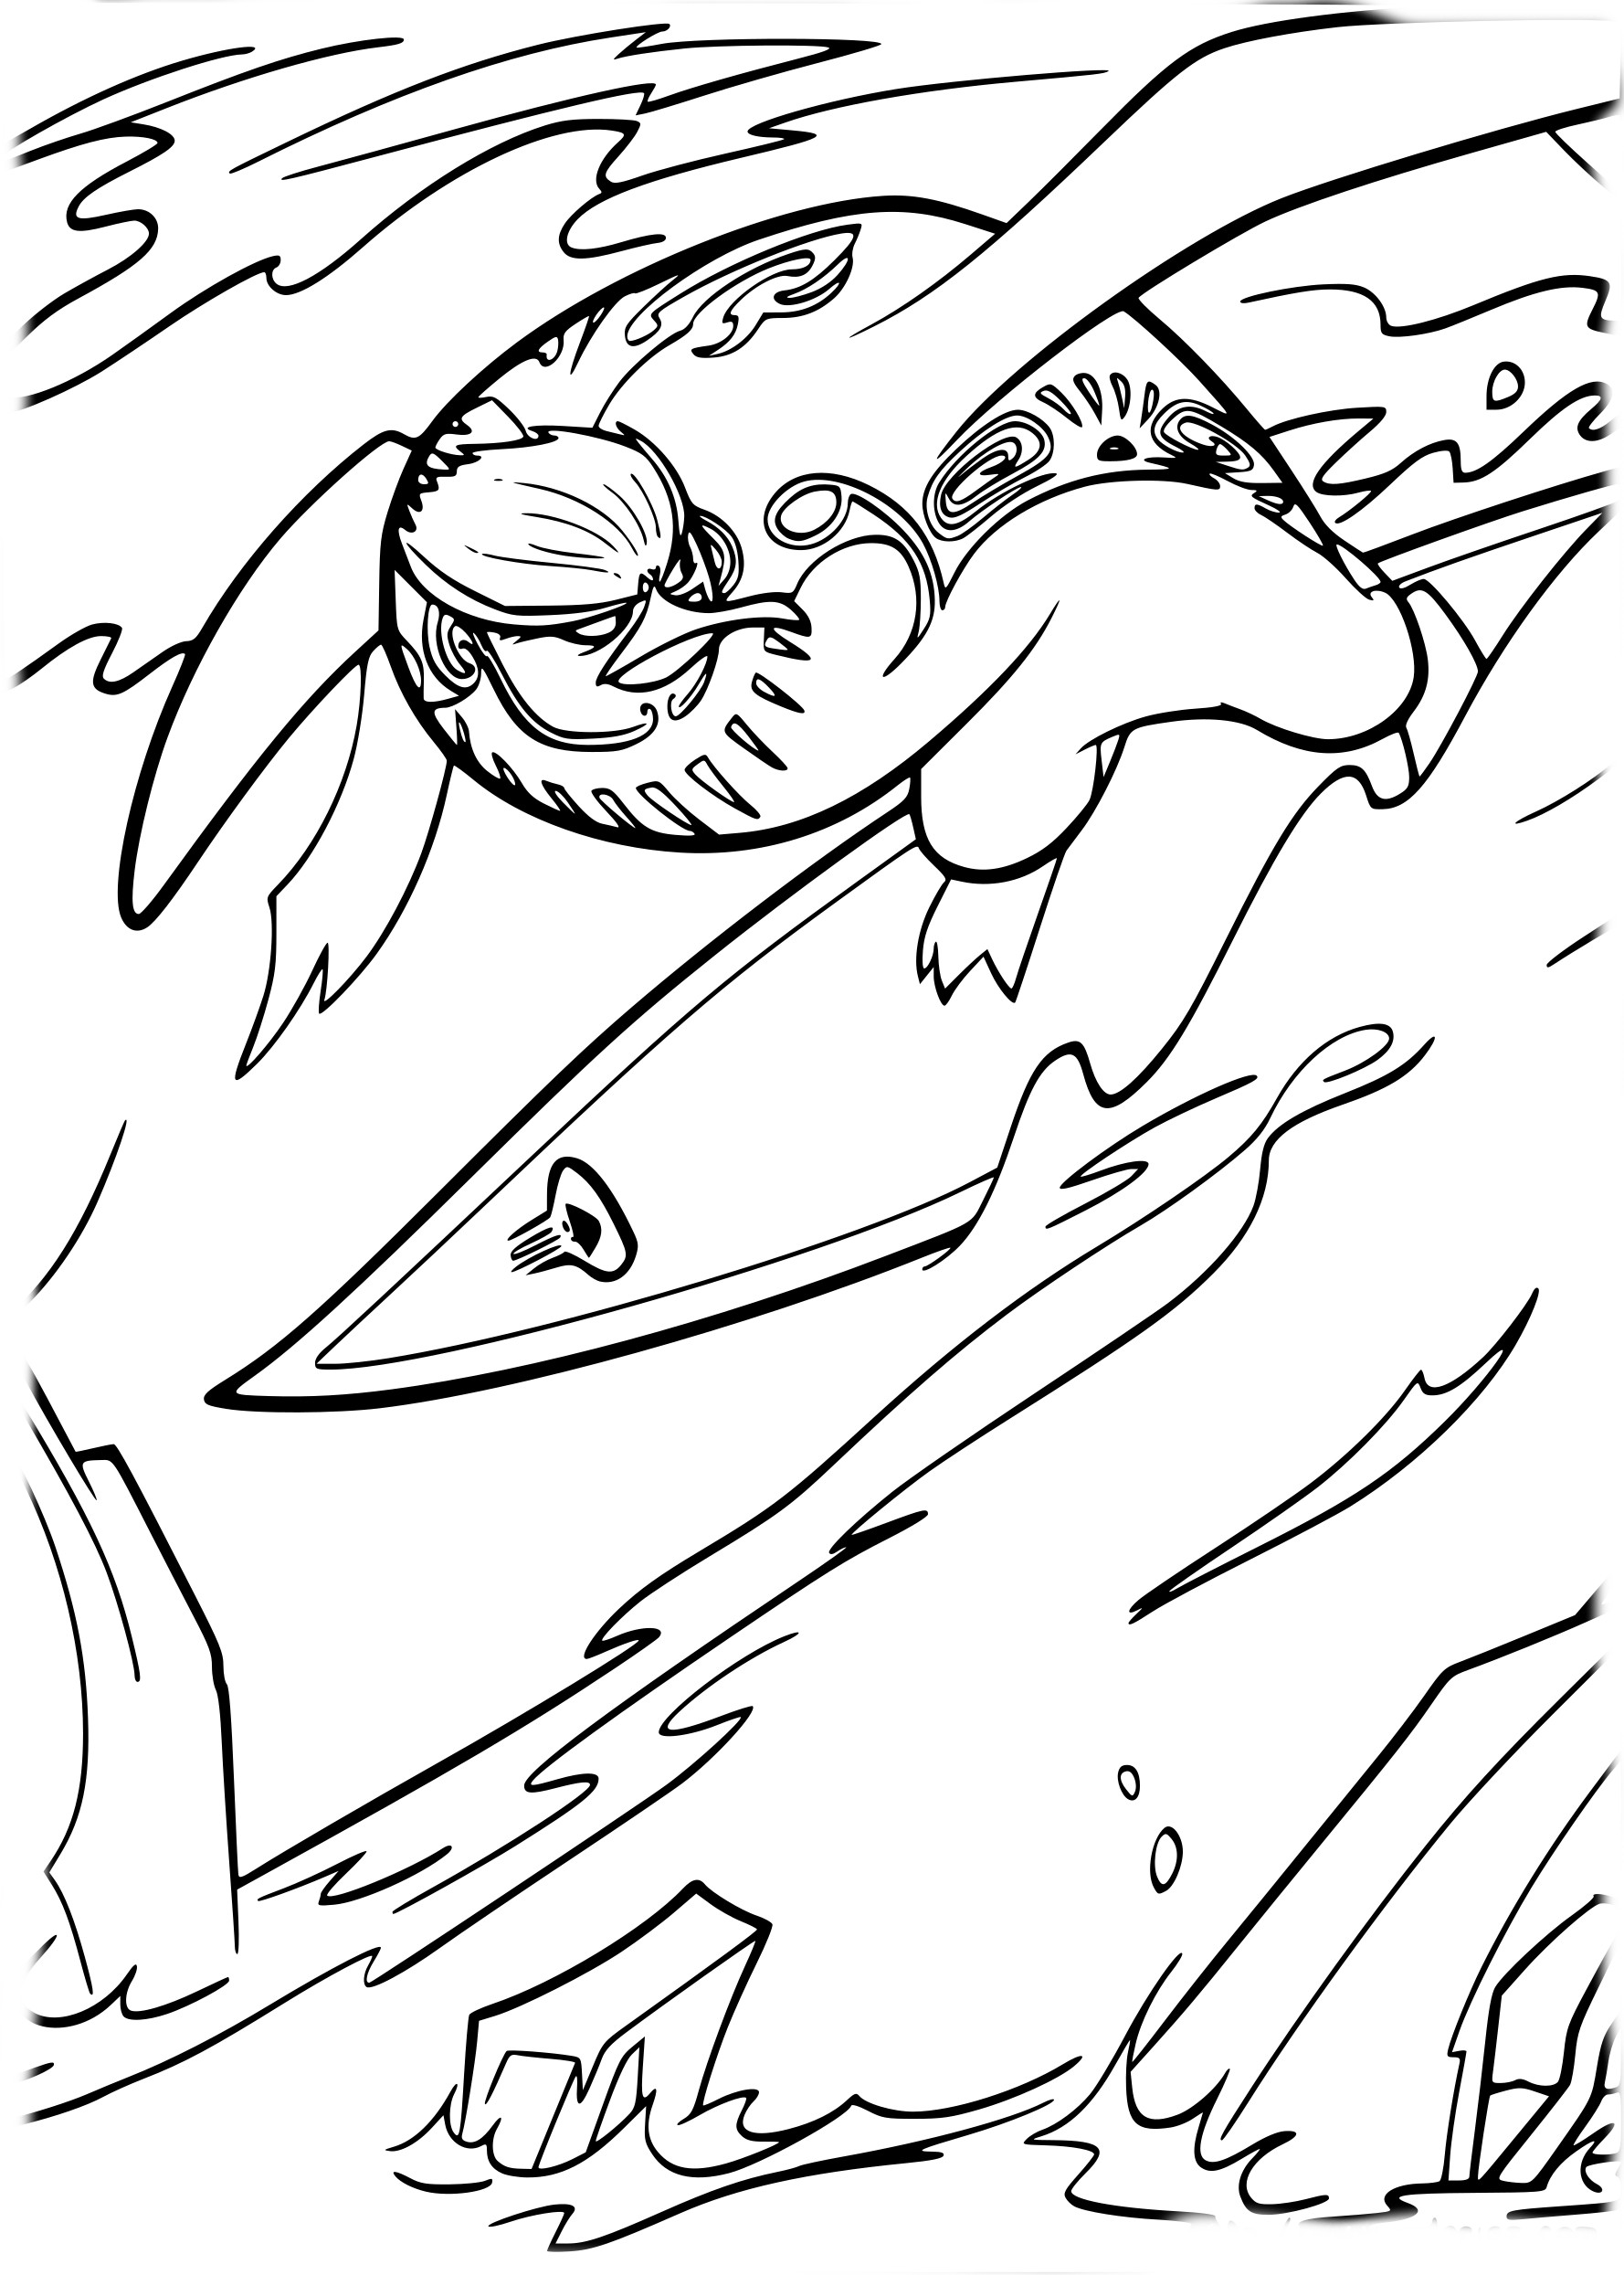 The Kings Of The Slopes coloring page